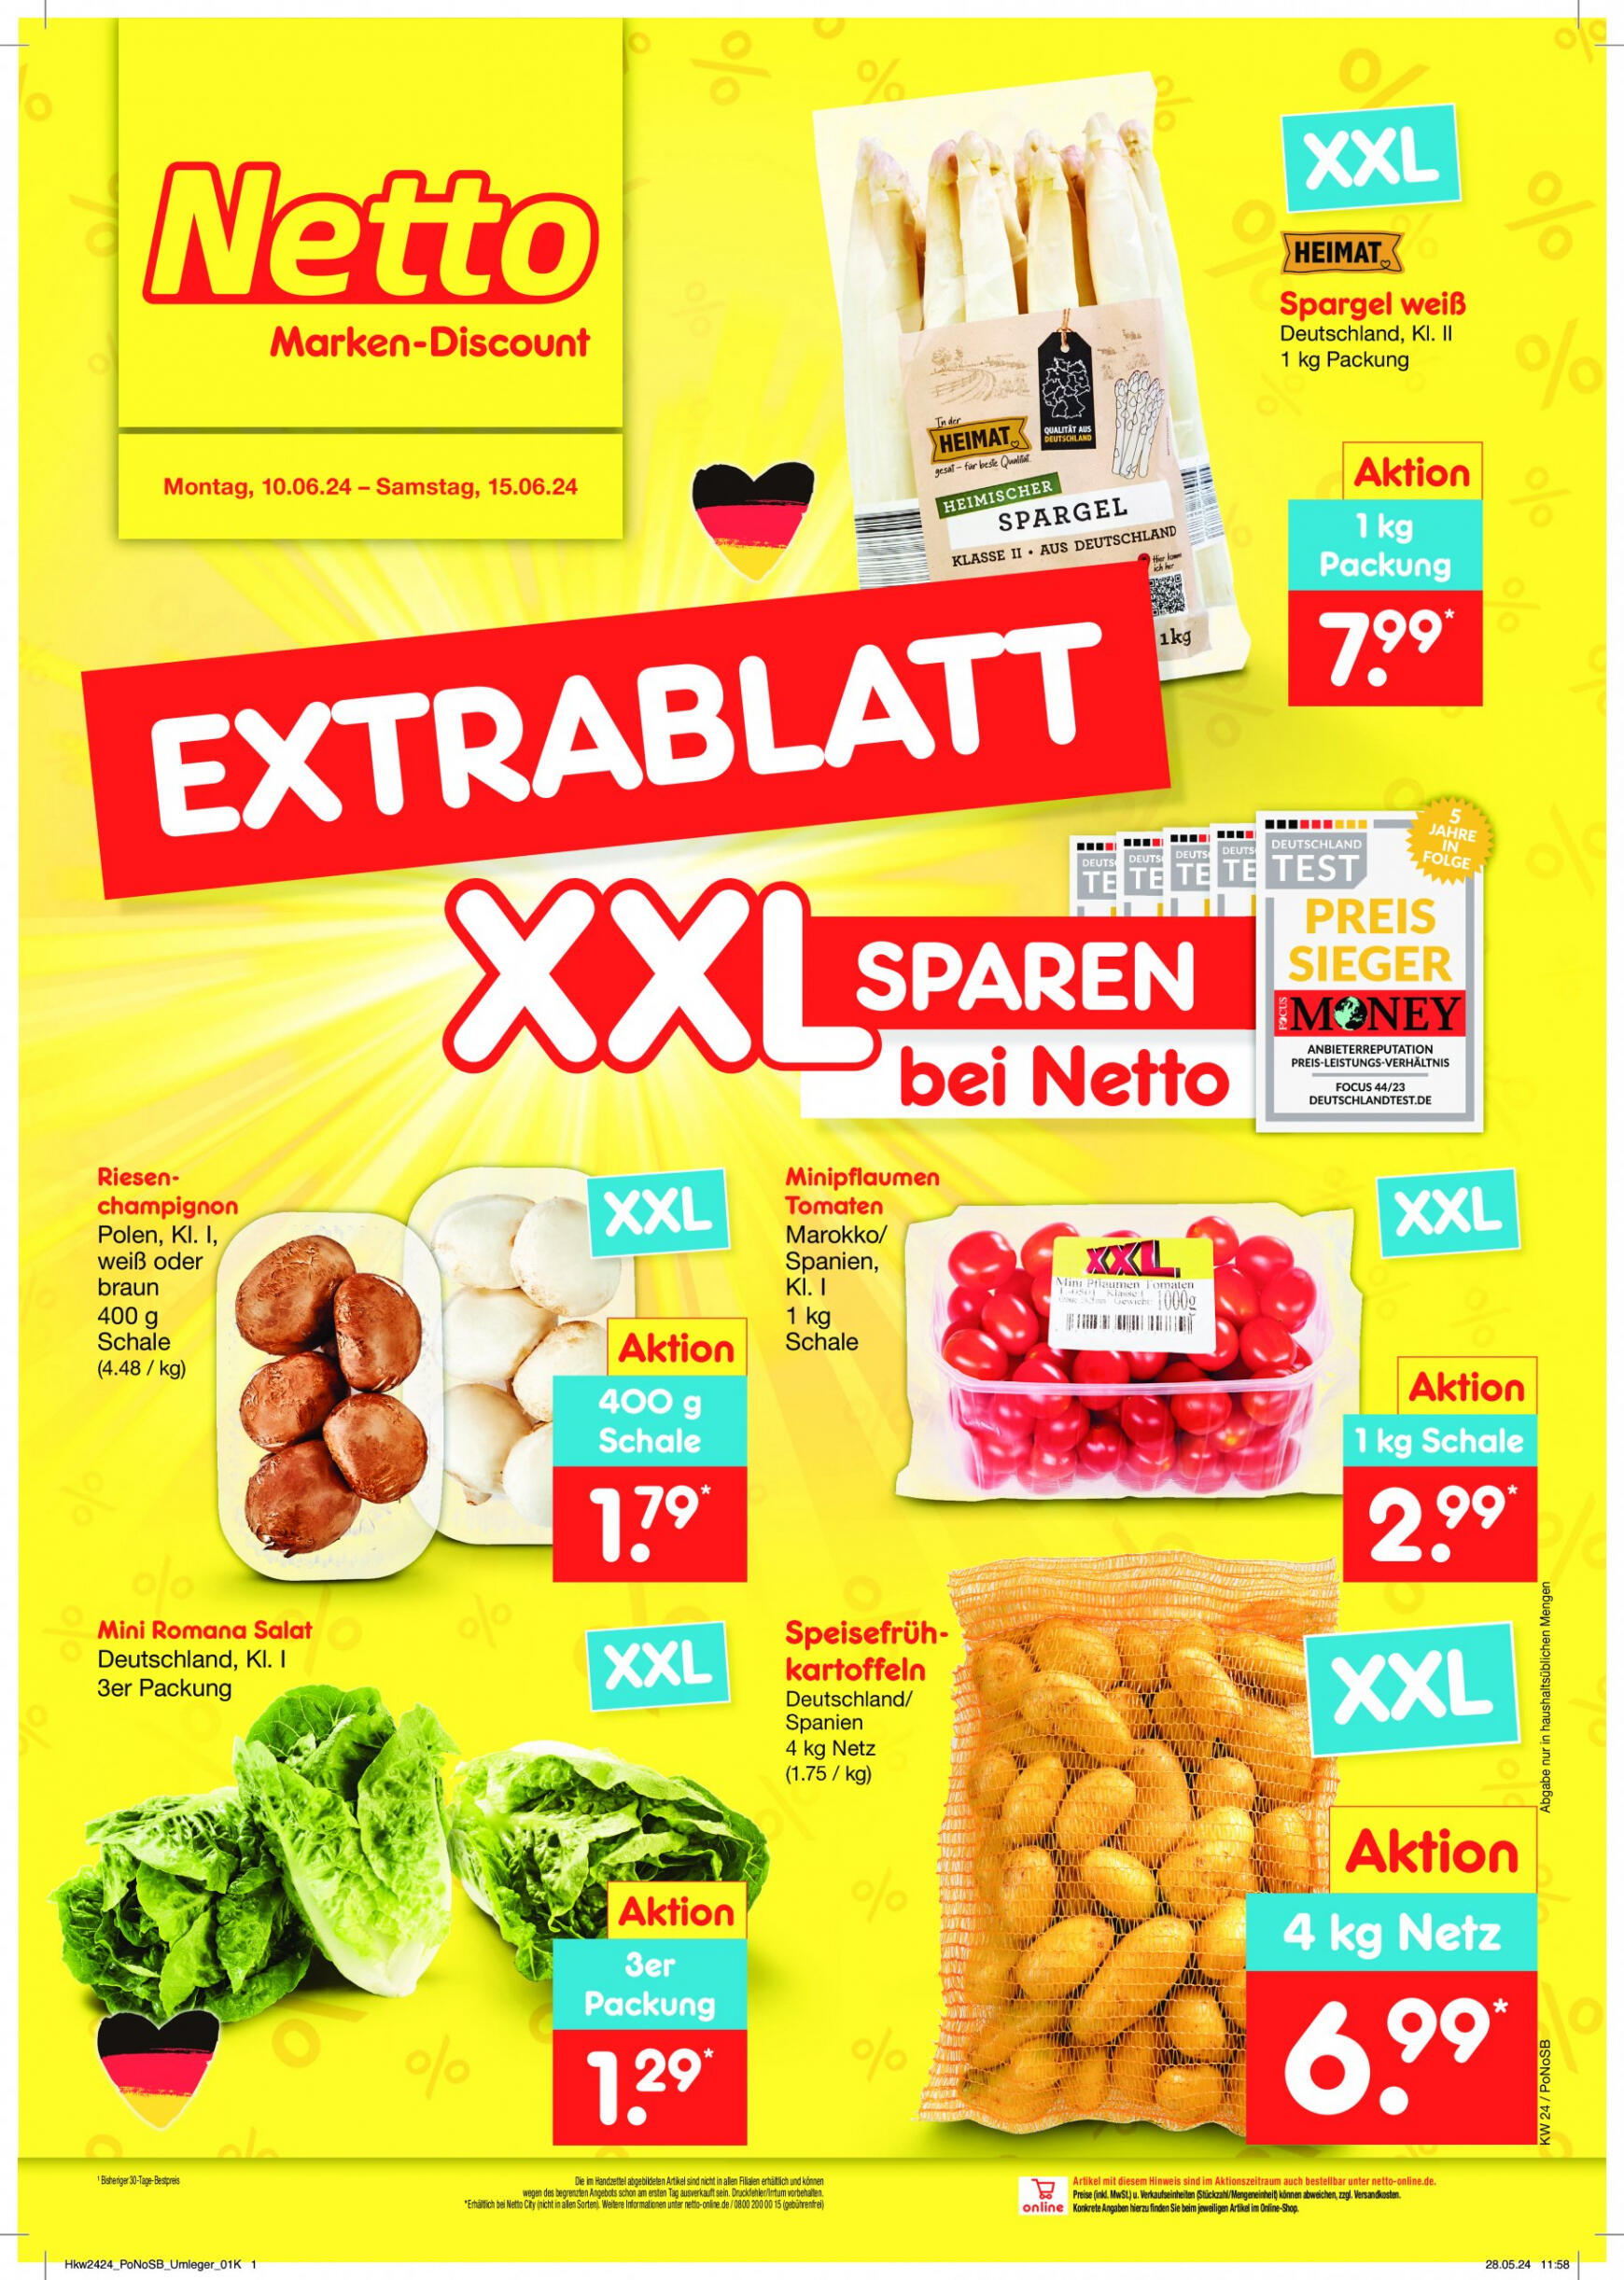 netto - Flyer Netto aktuell 10.06. - 15.06. - page: 2